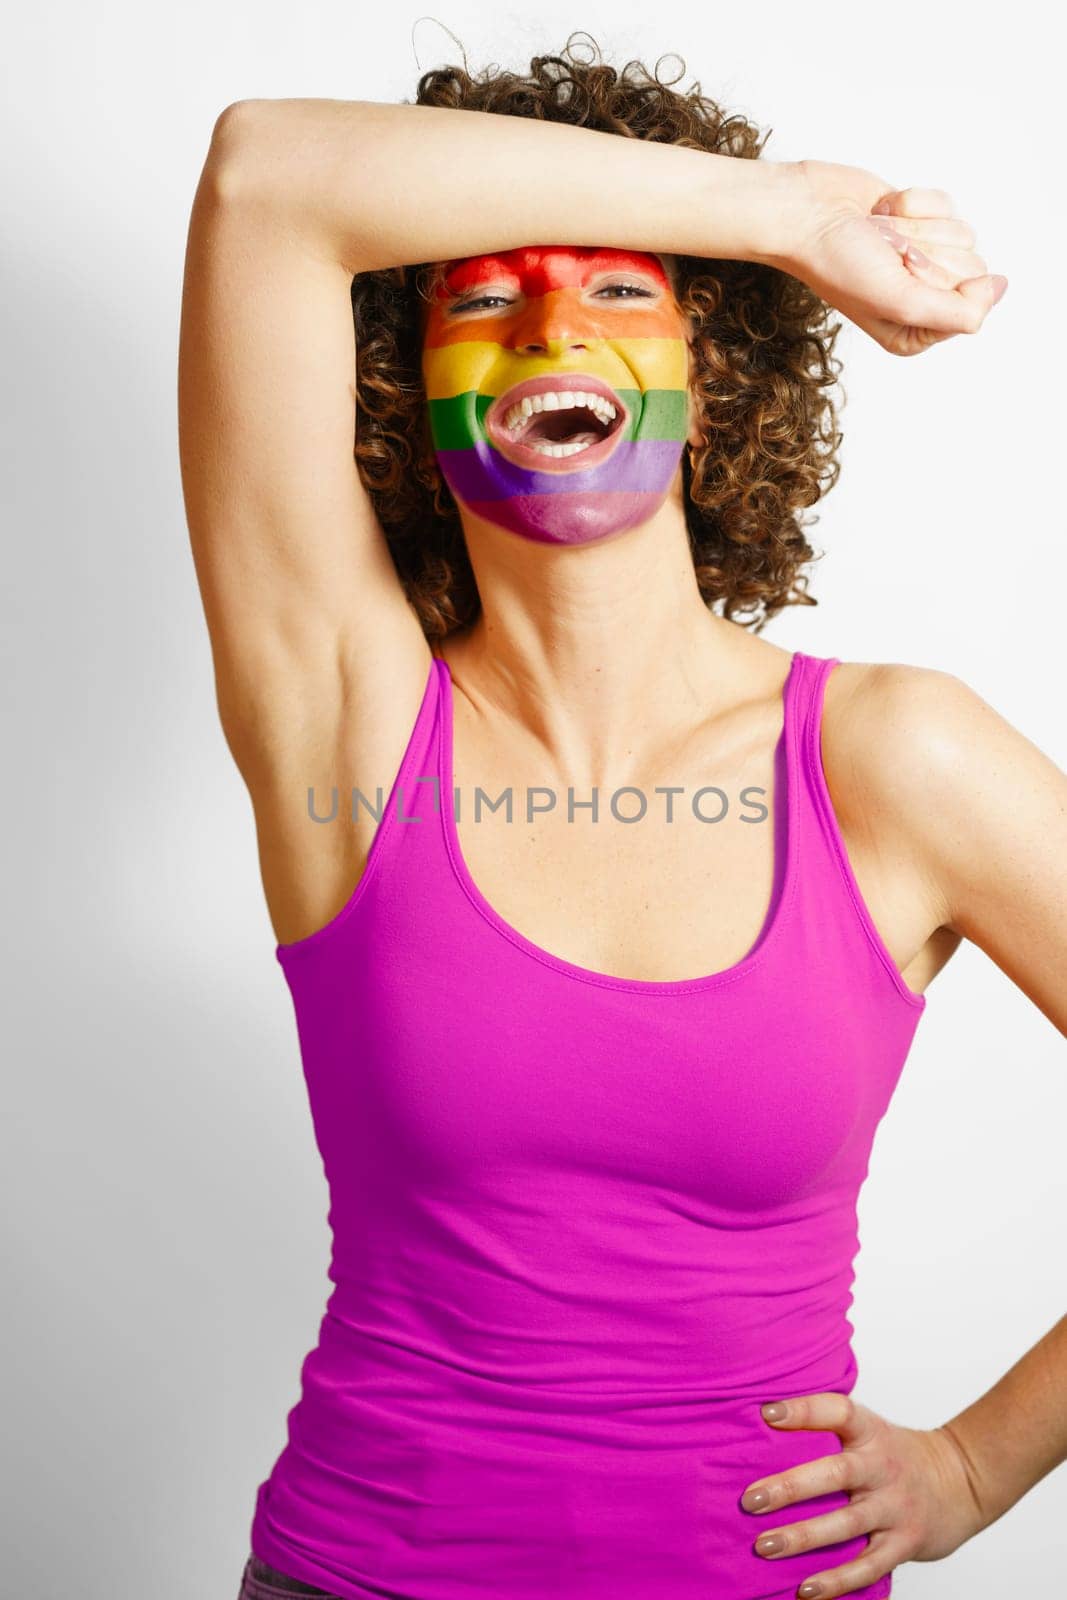 Cheerful female wearing purple tank top standing with hand on waist and painted in rainbow colors face looking at camera against white background